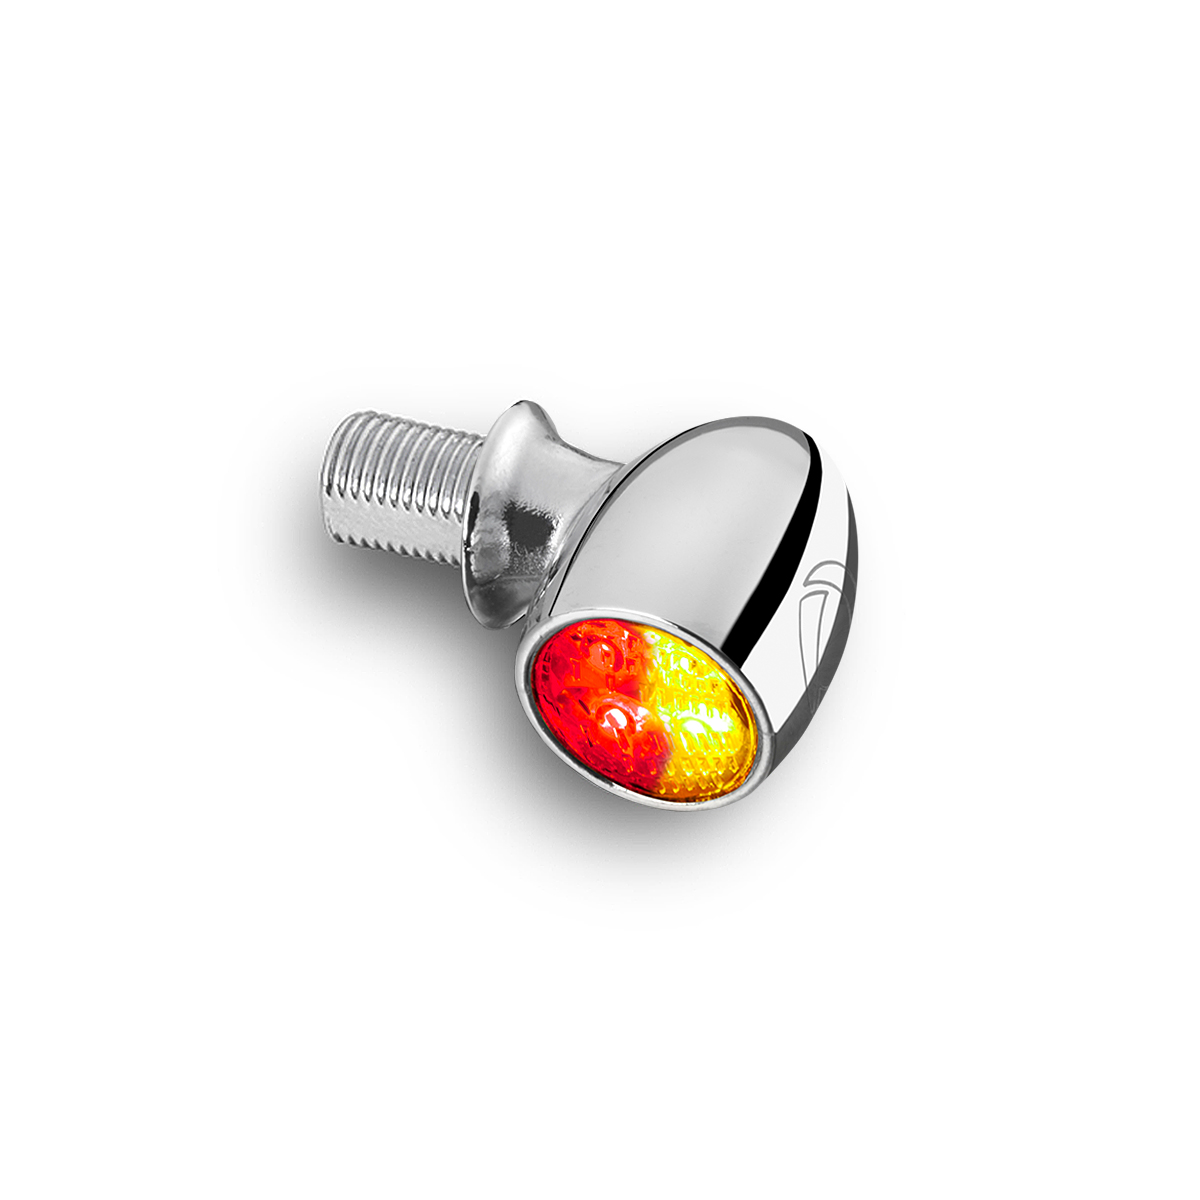 Motorbike Indicators LED Stop Tail Lights Integrated Blinkers Turn Signals 